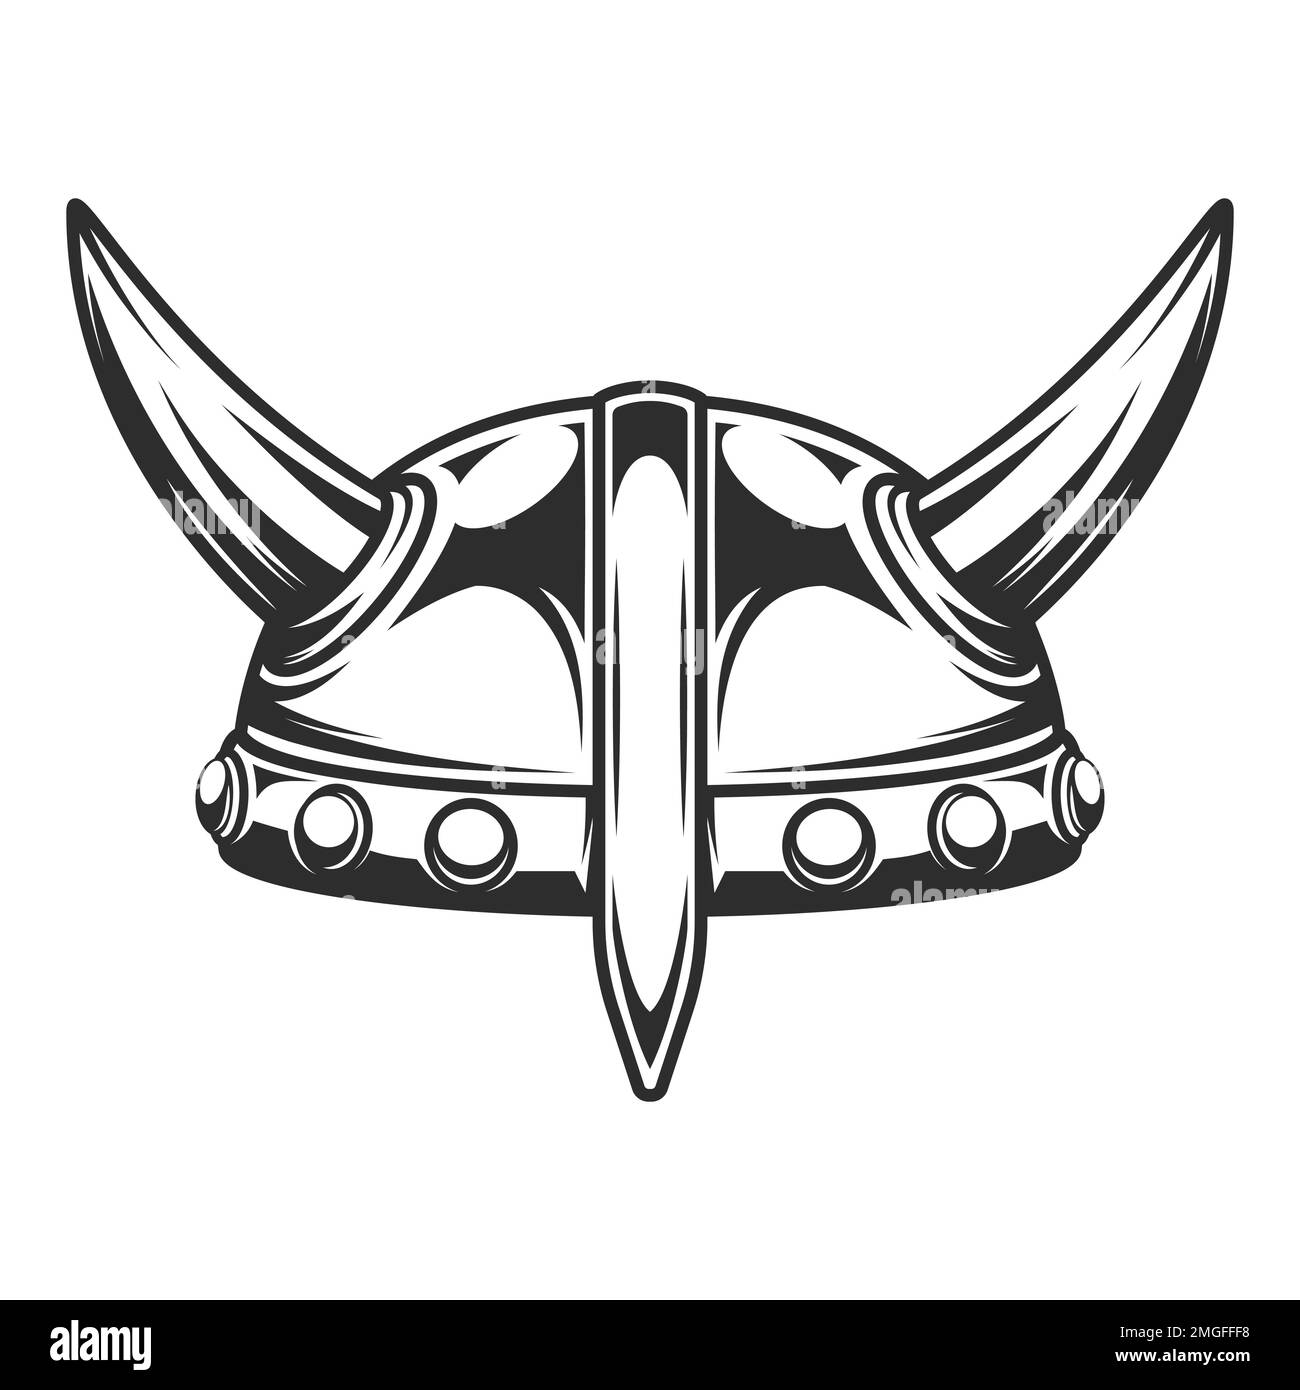 Viking vintage emblem with serious medieval nordic warrior horned helmet isolated illustration Stock Photo